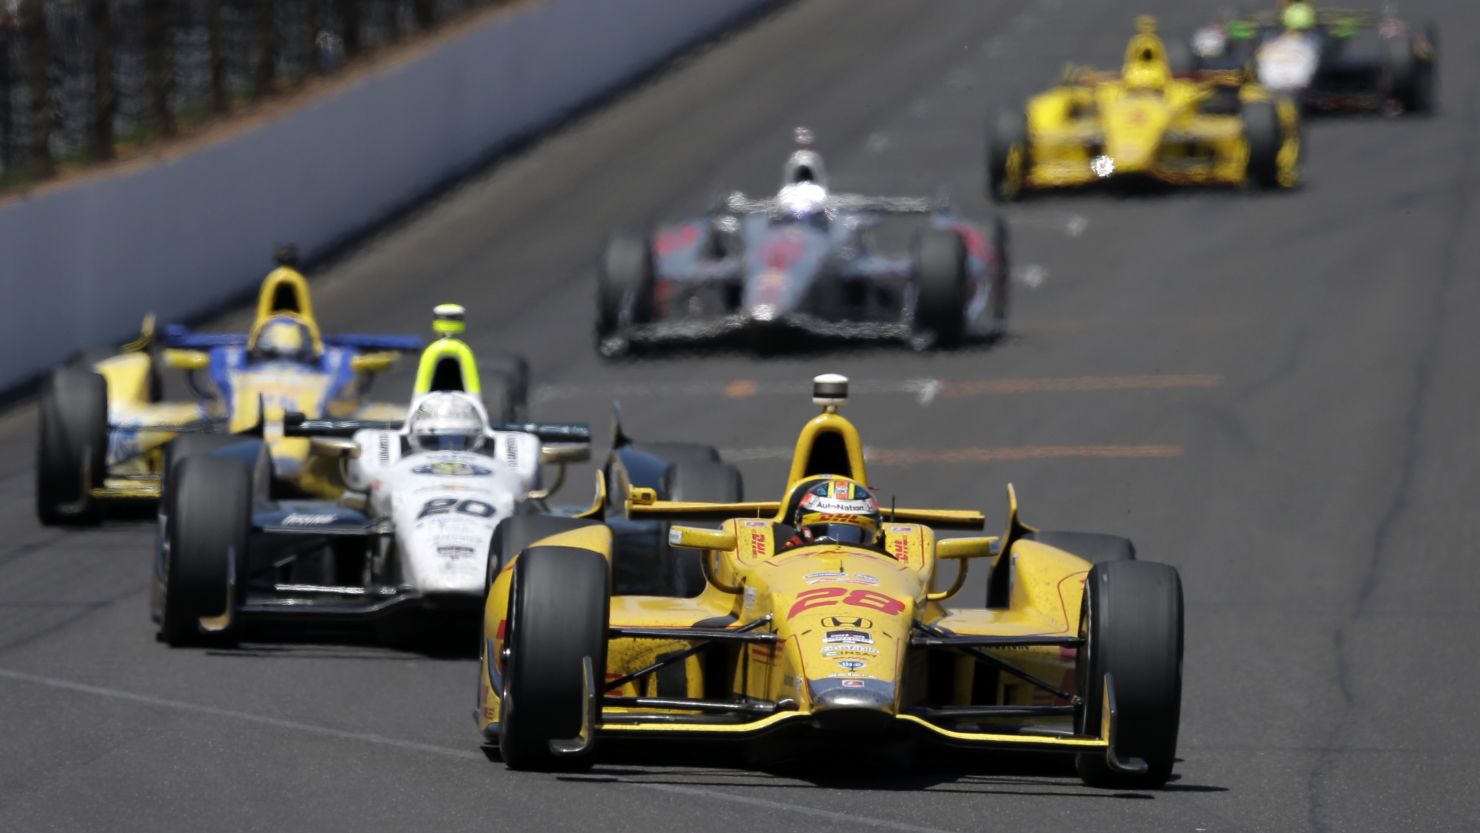 Ryan Hunter-Reay leads Ed Carpenter into the first turn during the 98th running of the Indianapolis 500 on Sunday, May 25.